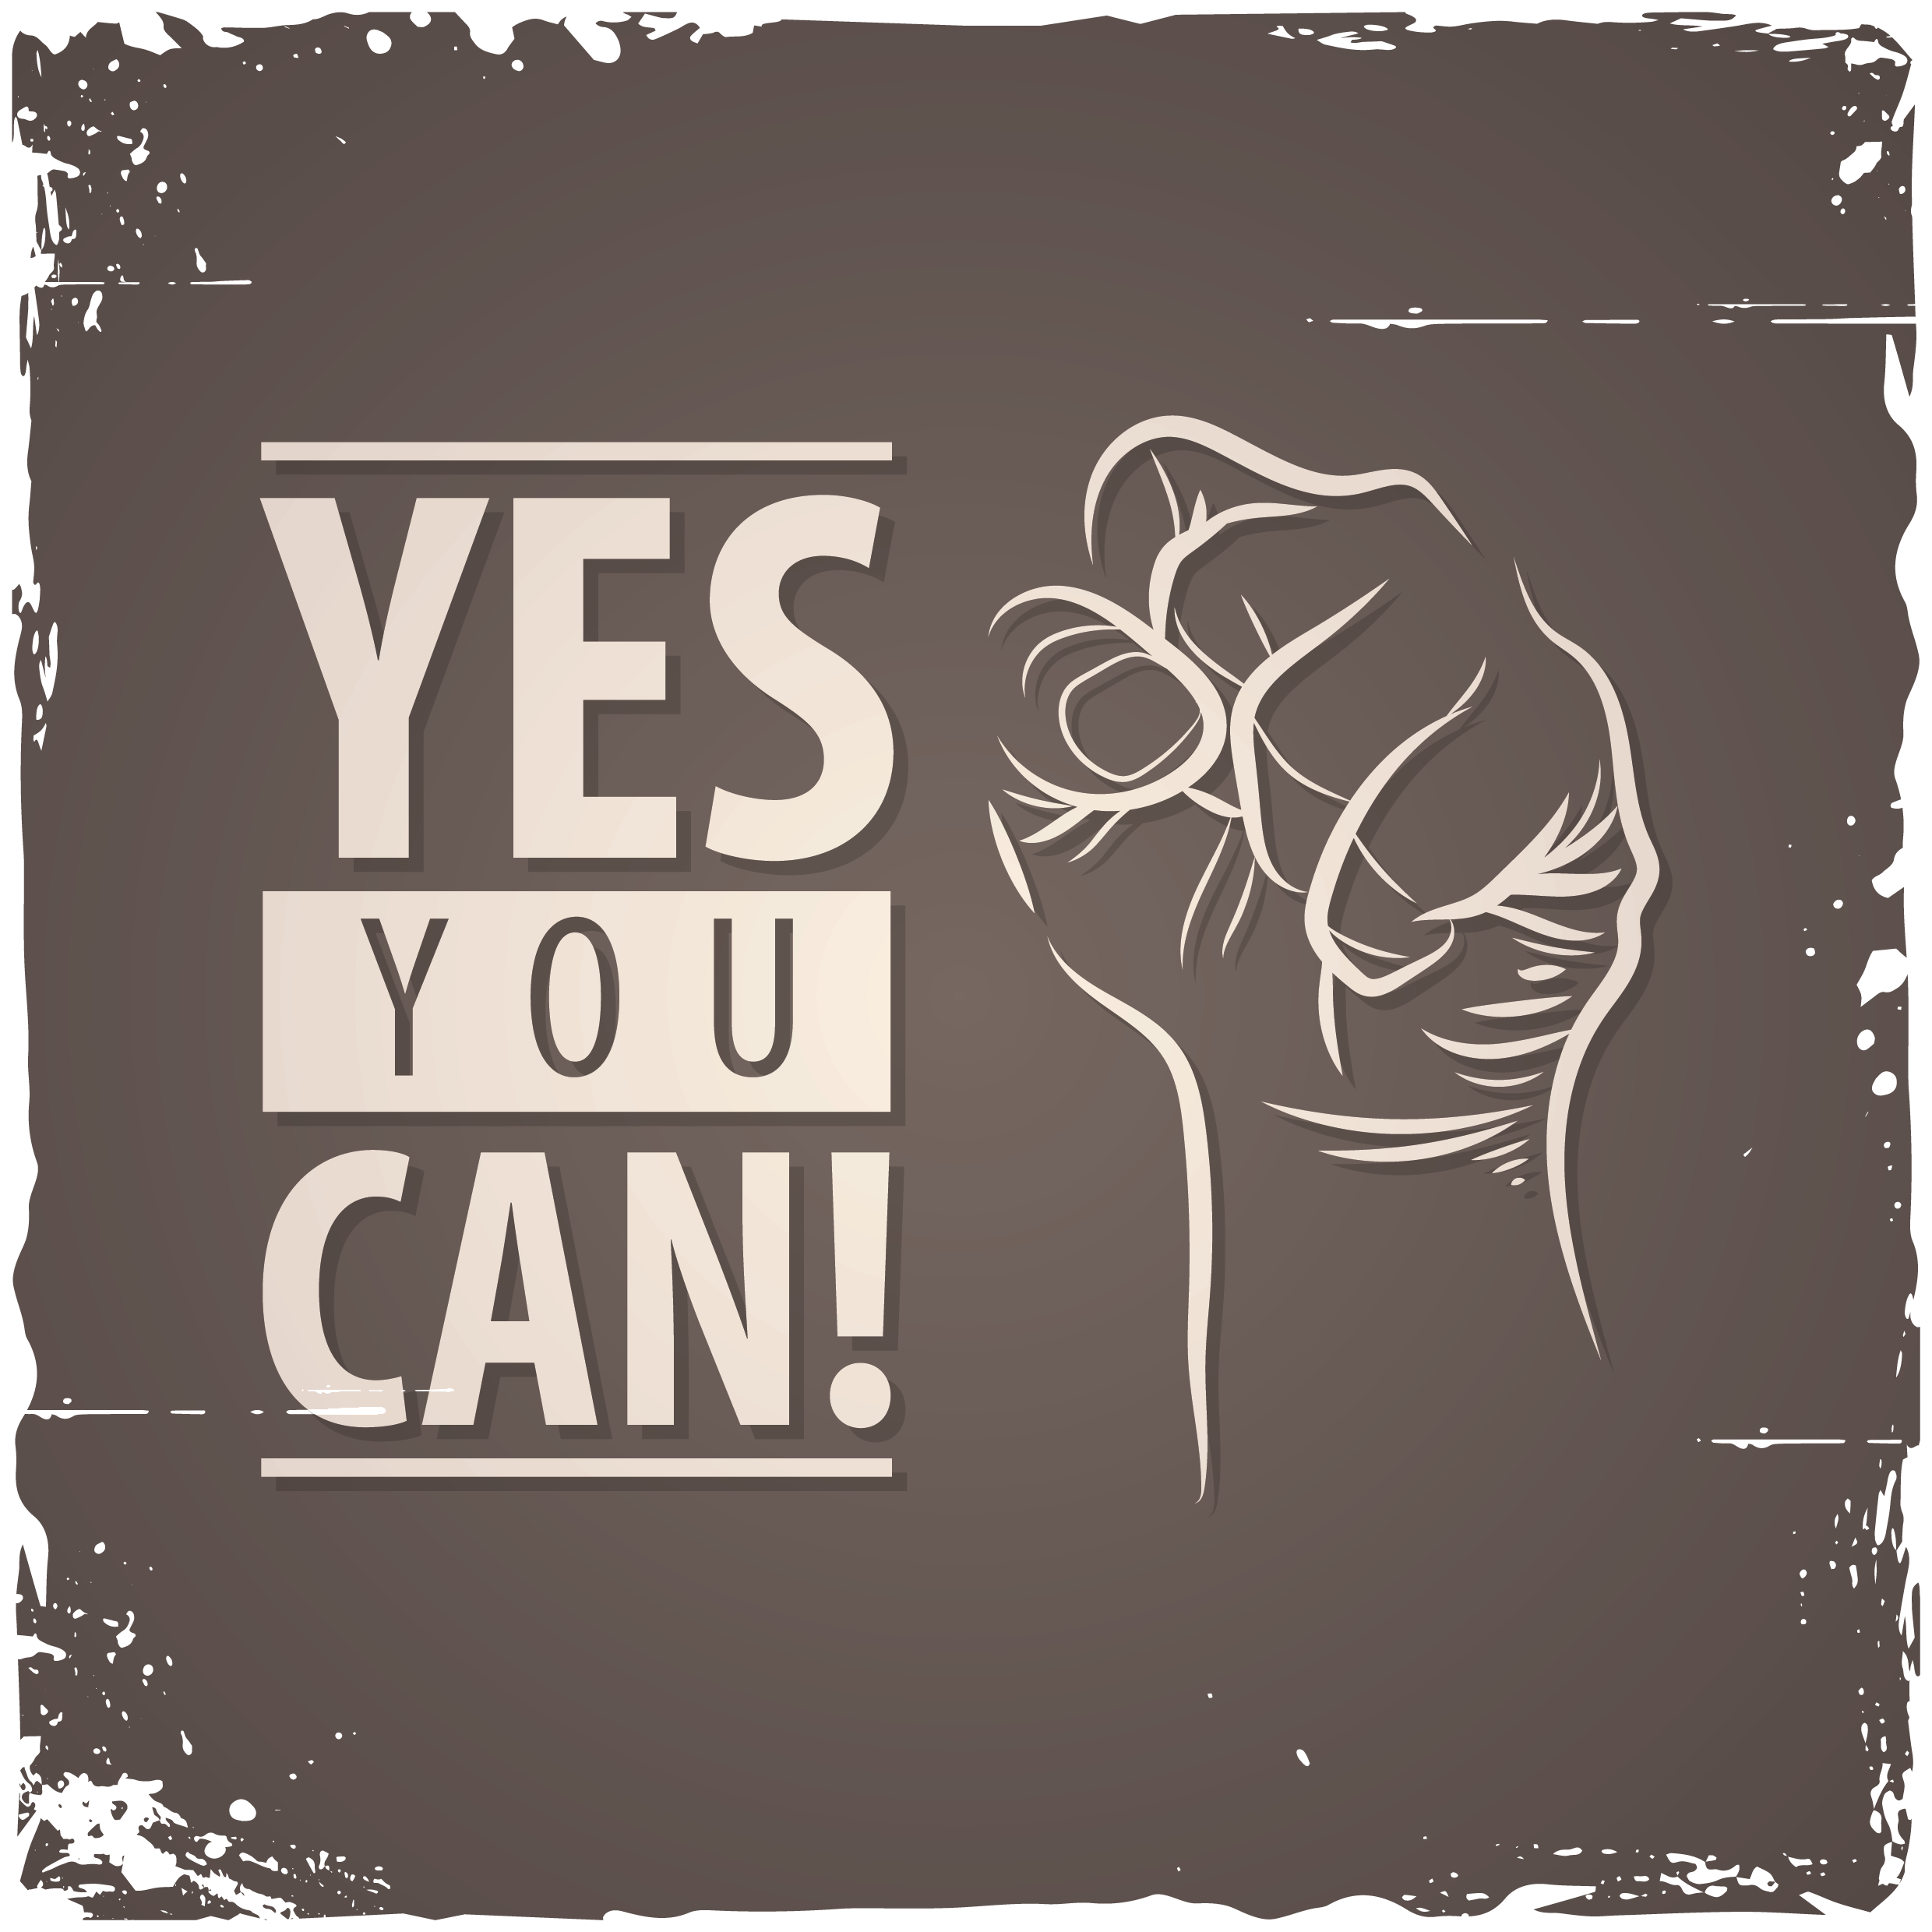 Yes i do. Yes you can. Yes you can картинка. Обои на телефон Yes you can. Заставка Yes i can.